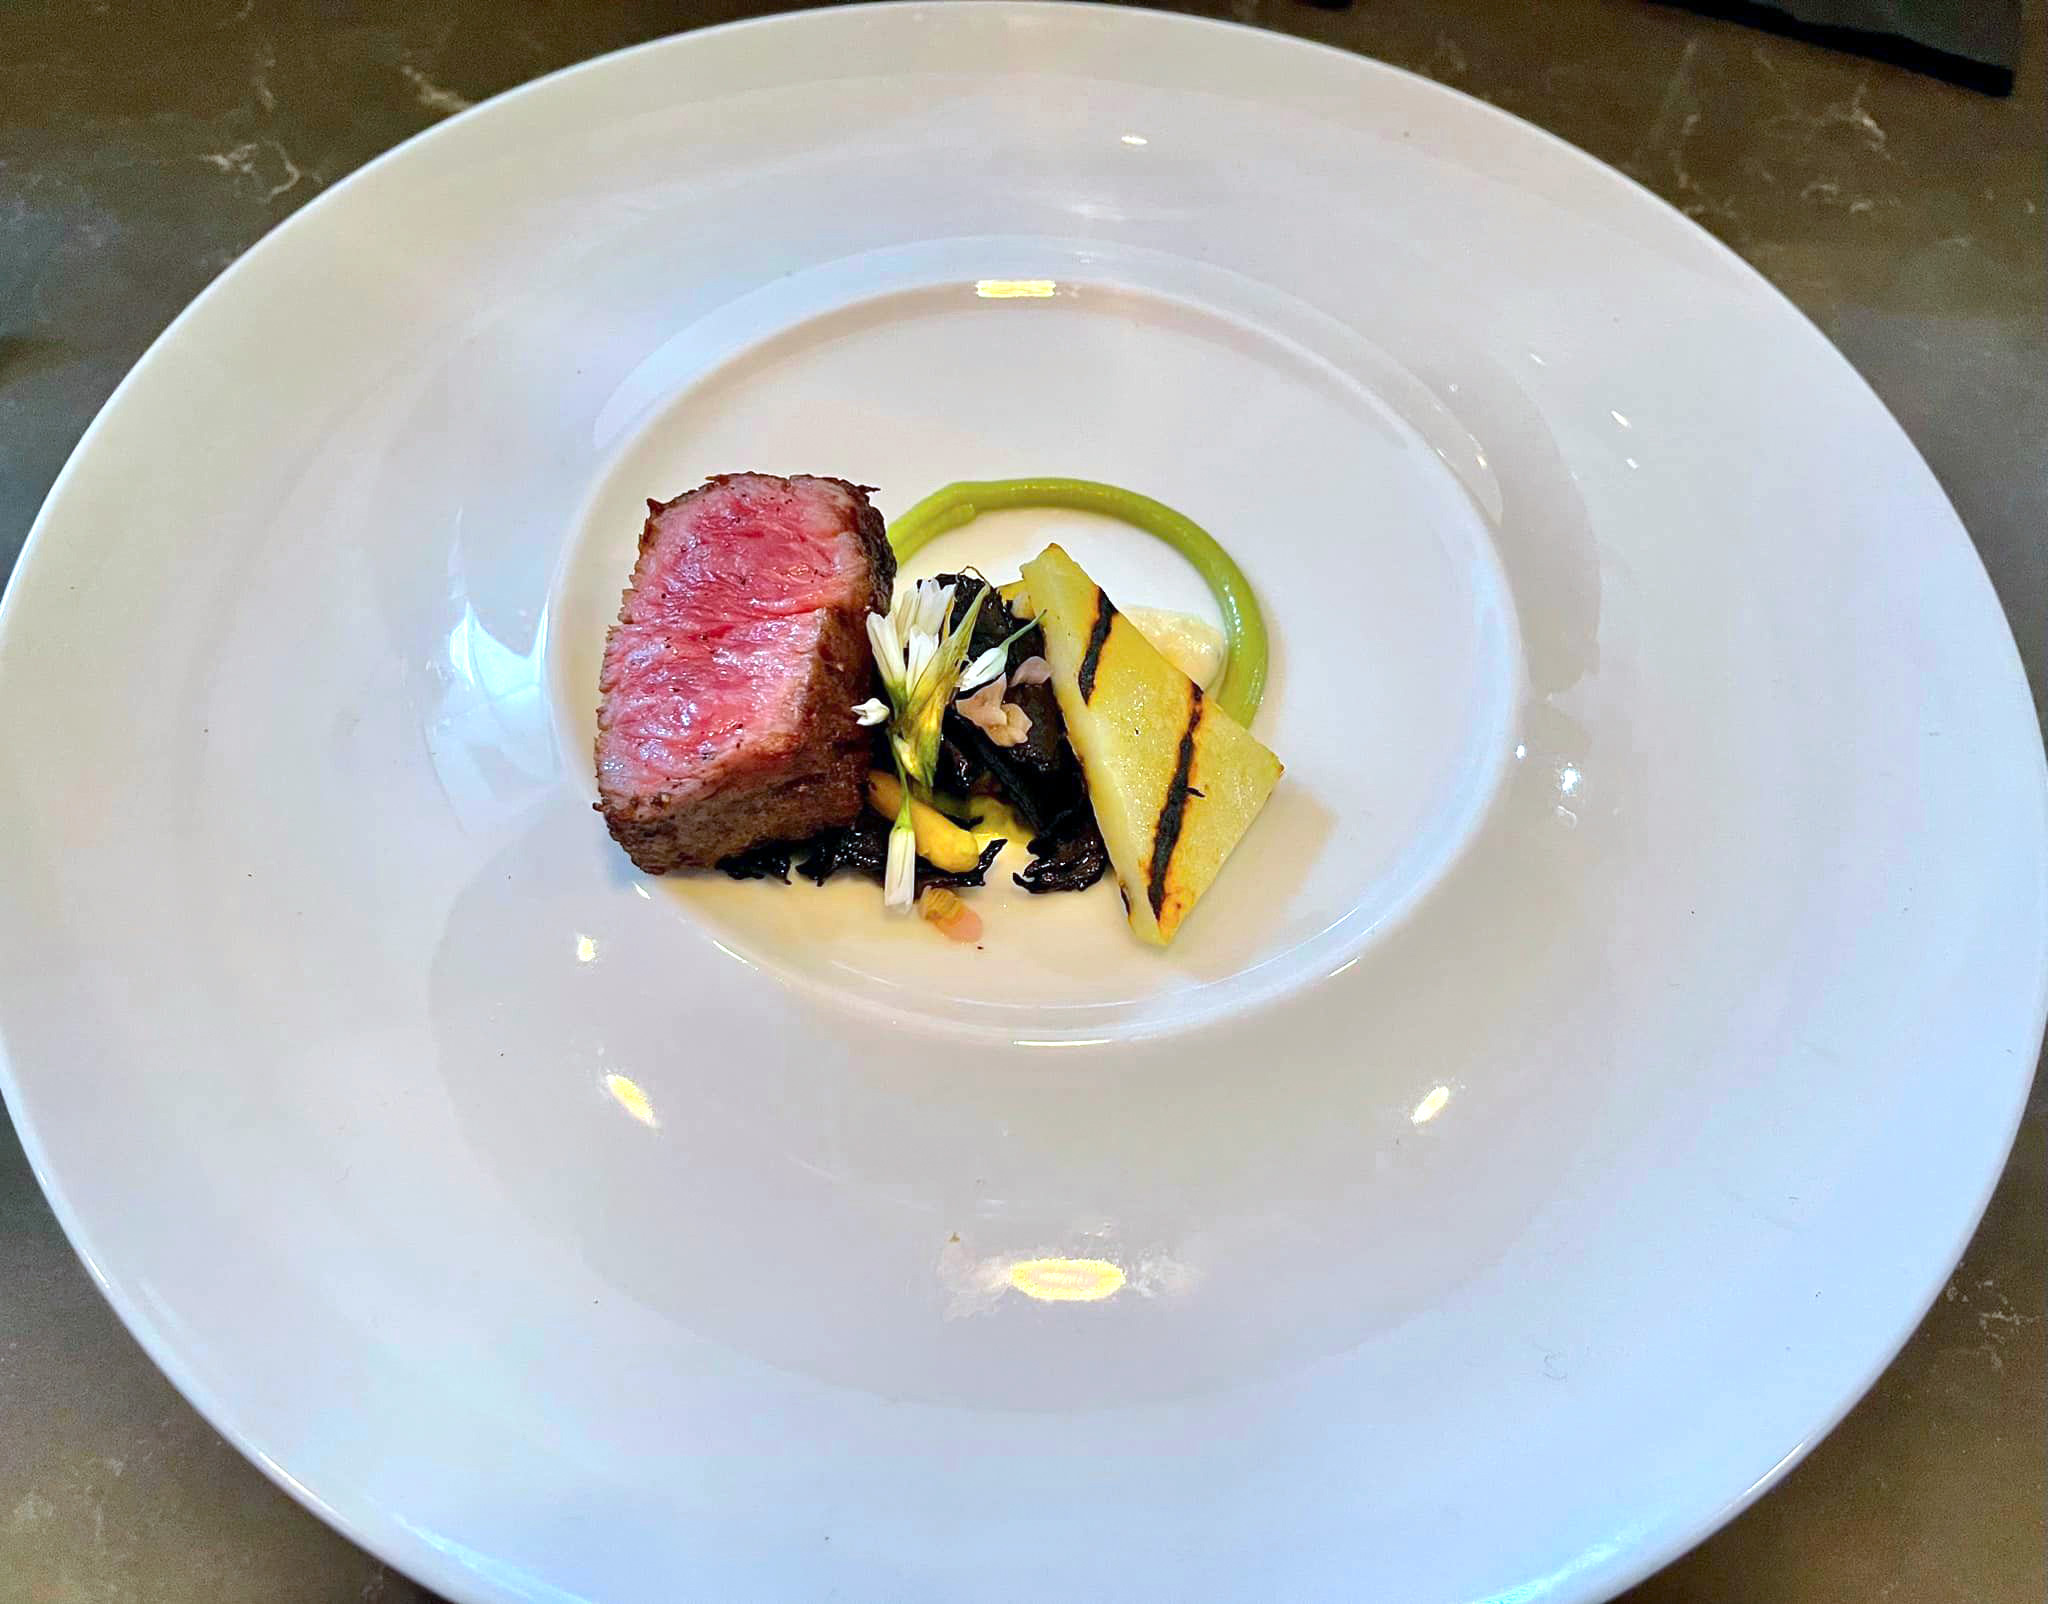 Wagyu with truffle creme and black trumpet mushrooms